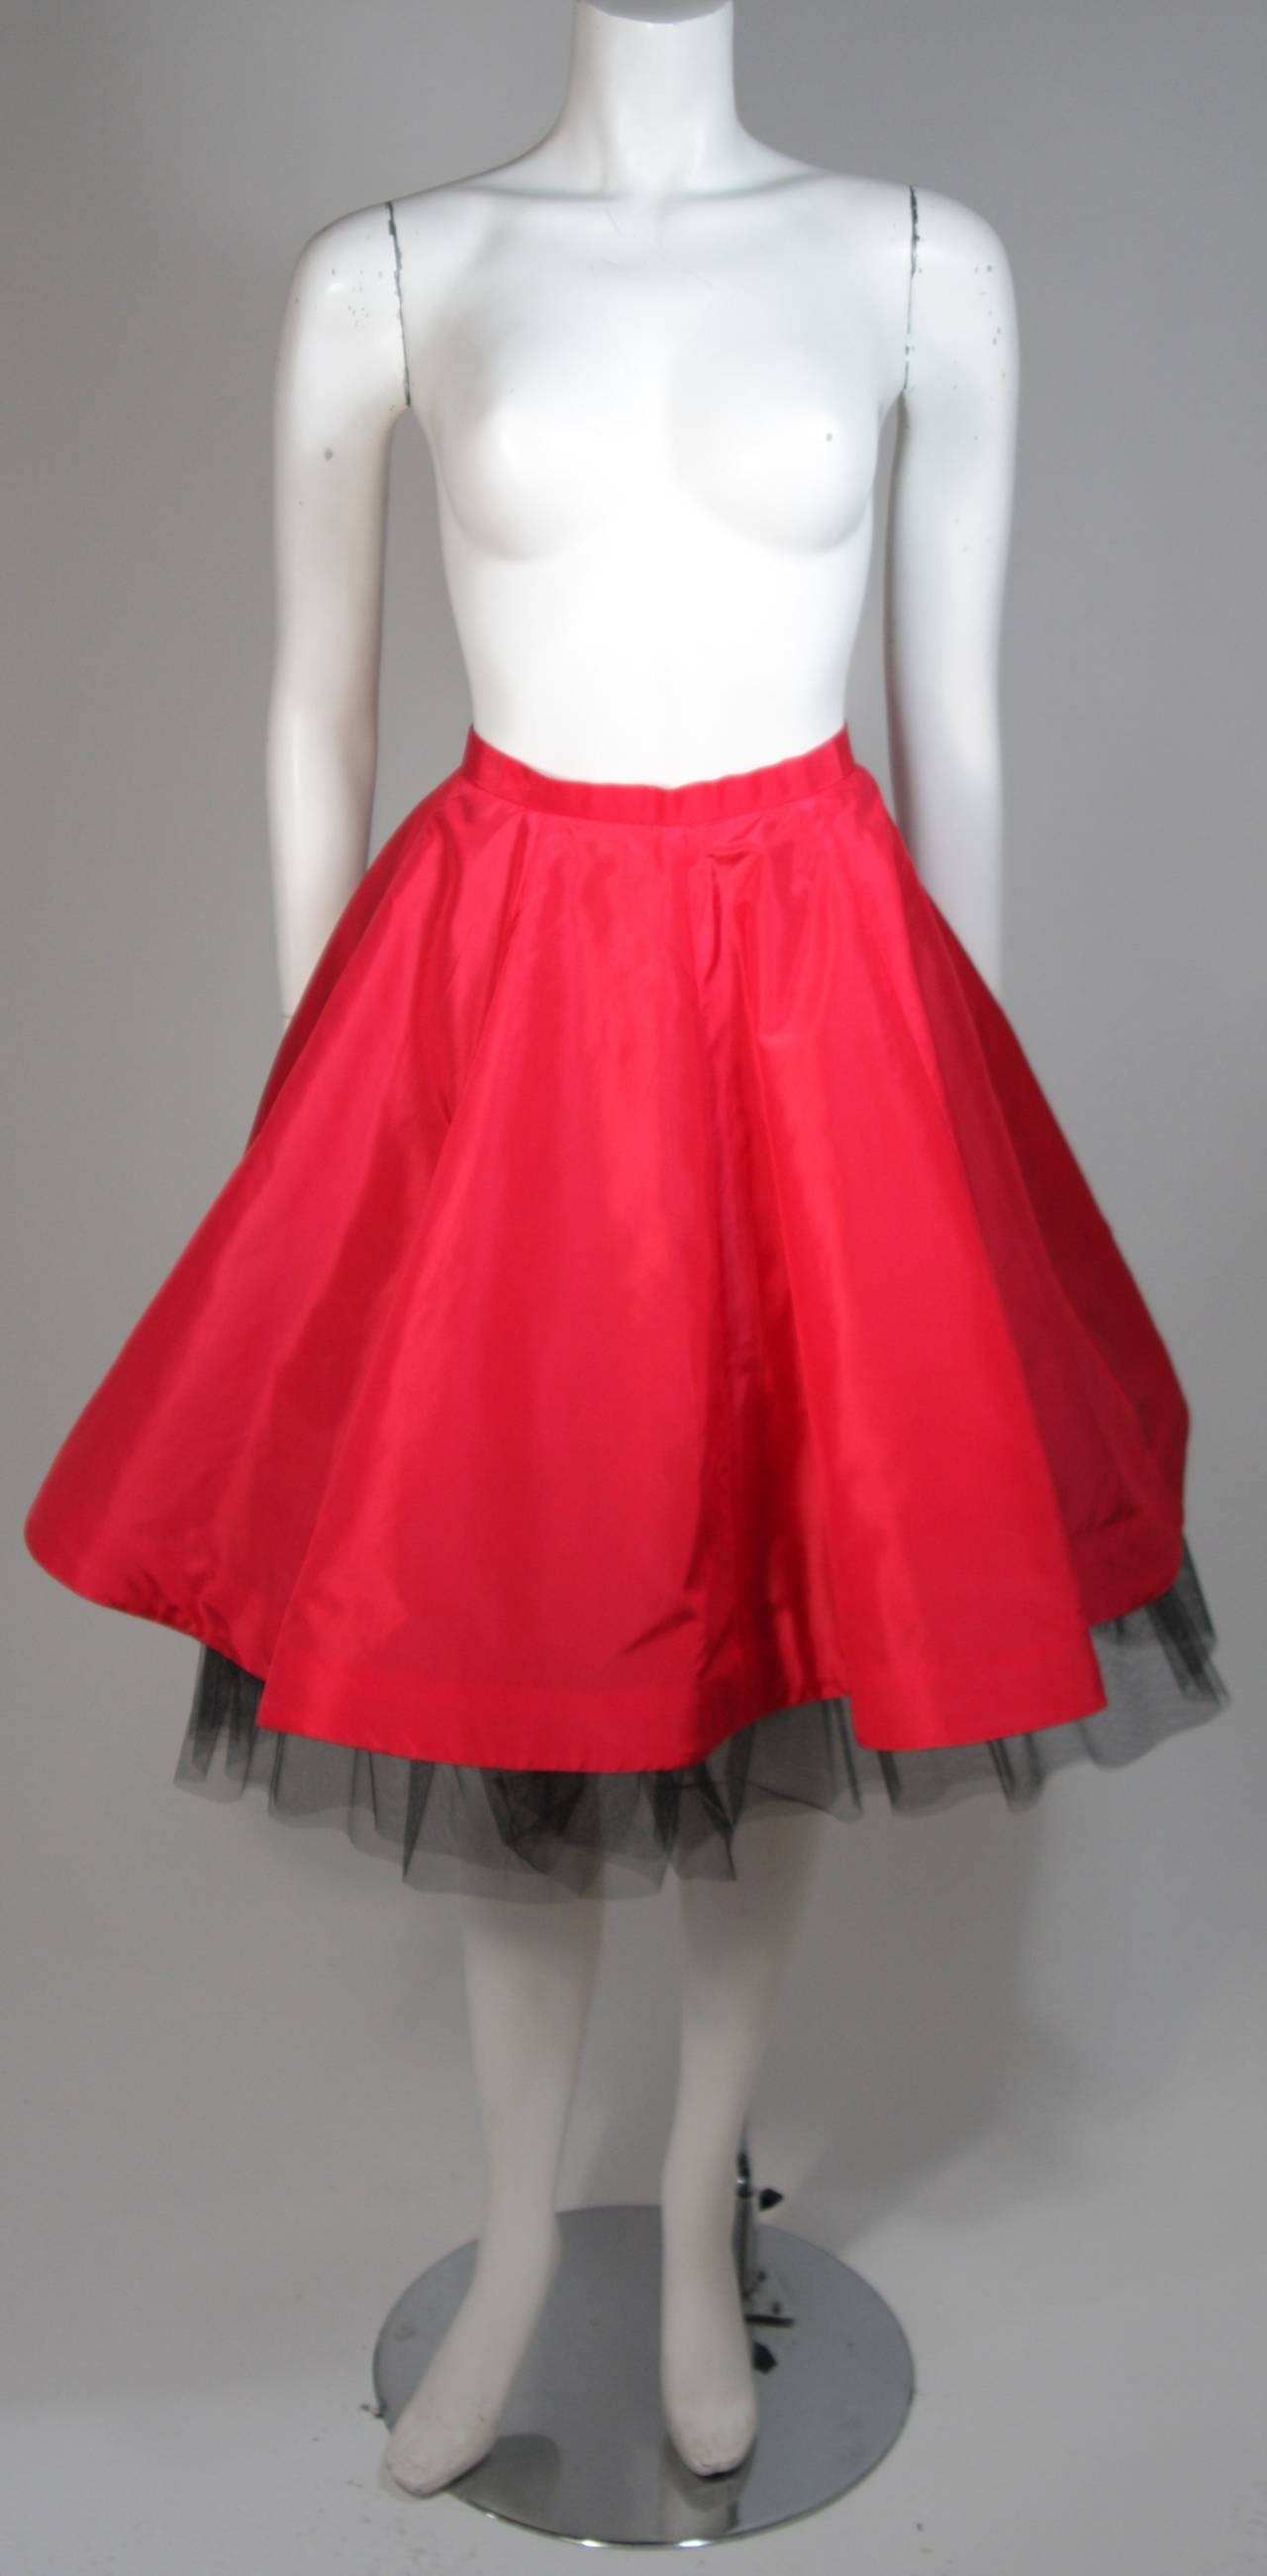 This Oscar De La Renta design is available for viewing at our Beverly Hills Boutique. We offer a large selection of evening gowns and luxury garments. 

 This skirt is composed of a red fabric and features a black crinoline. There are two pieces